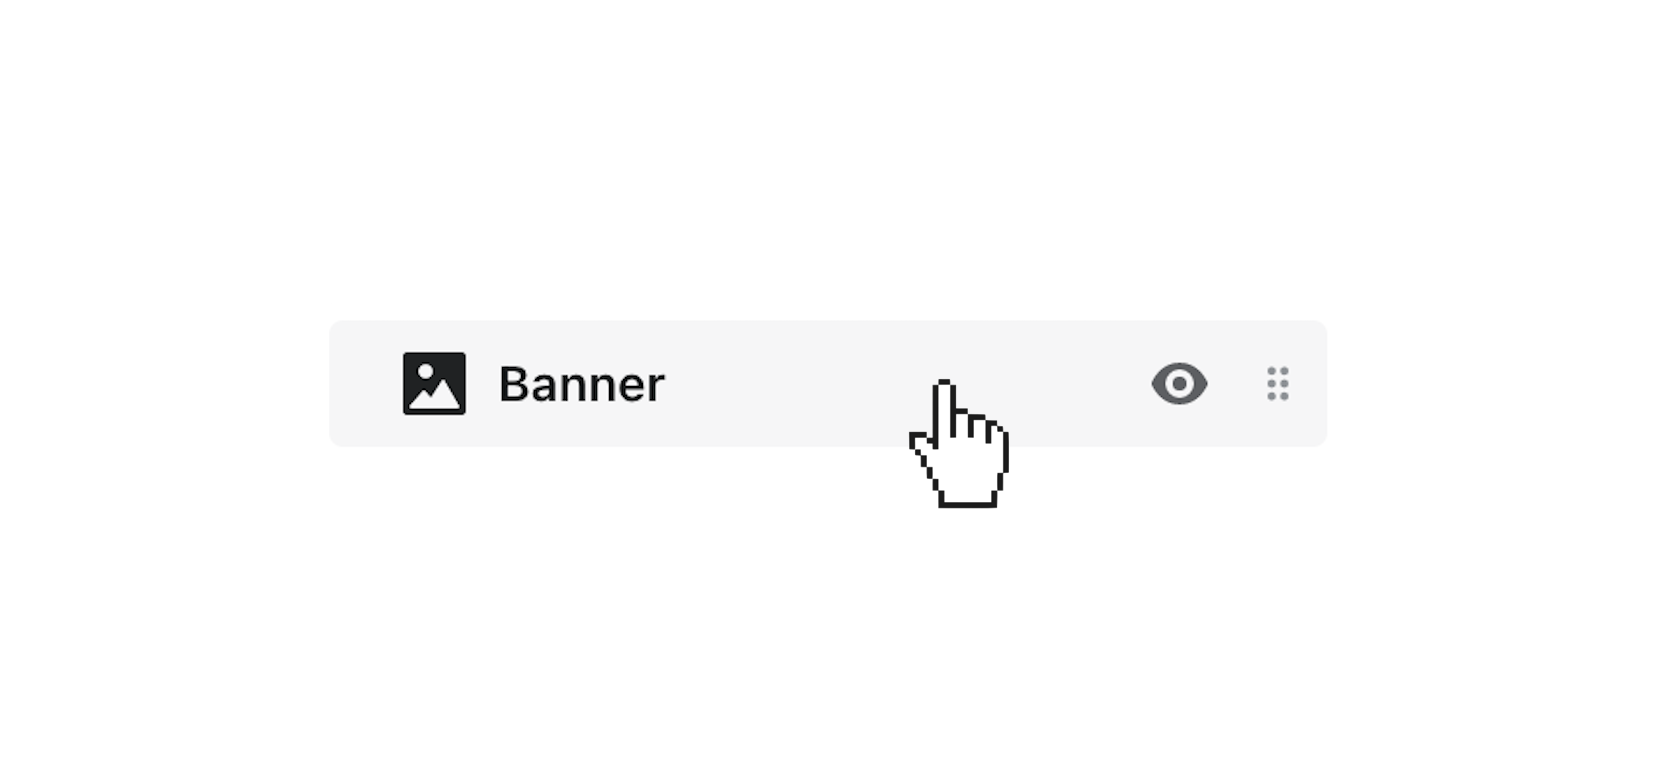 click_banner_to_open_the_flex_collection_page_banner_settings.png